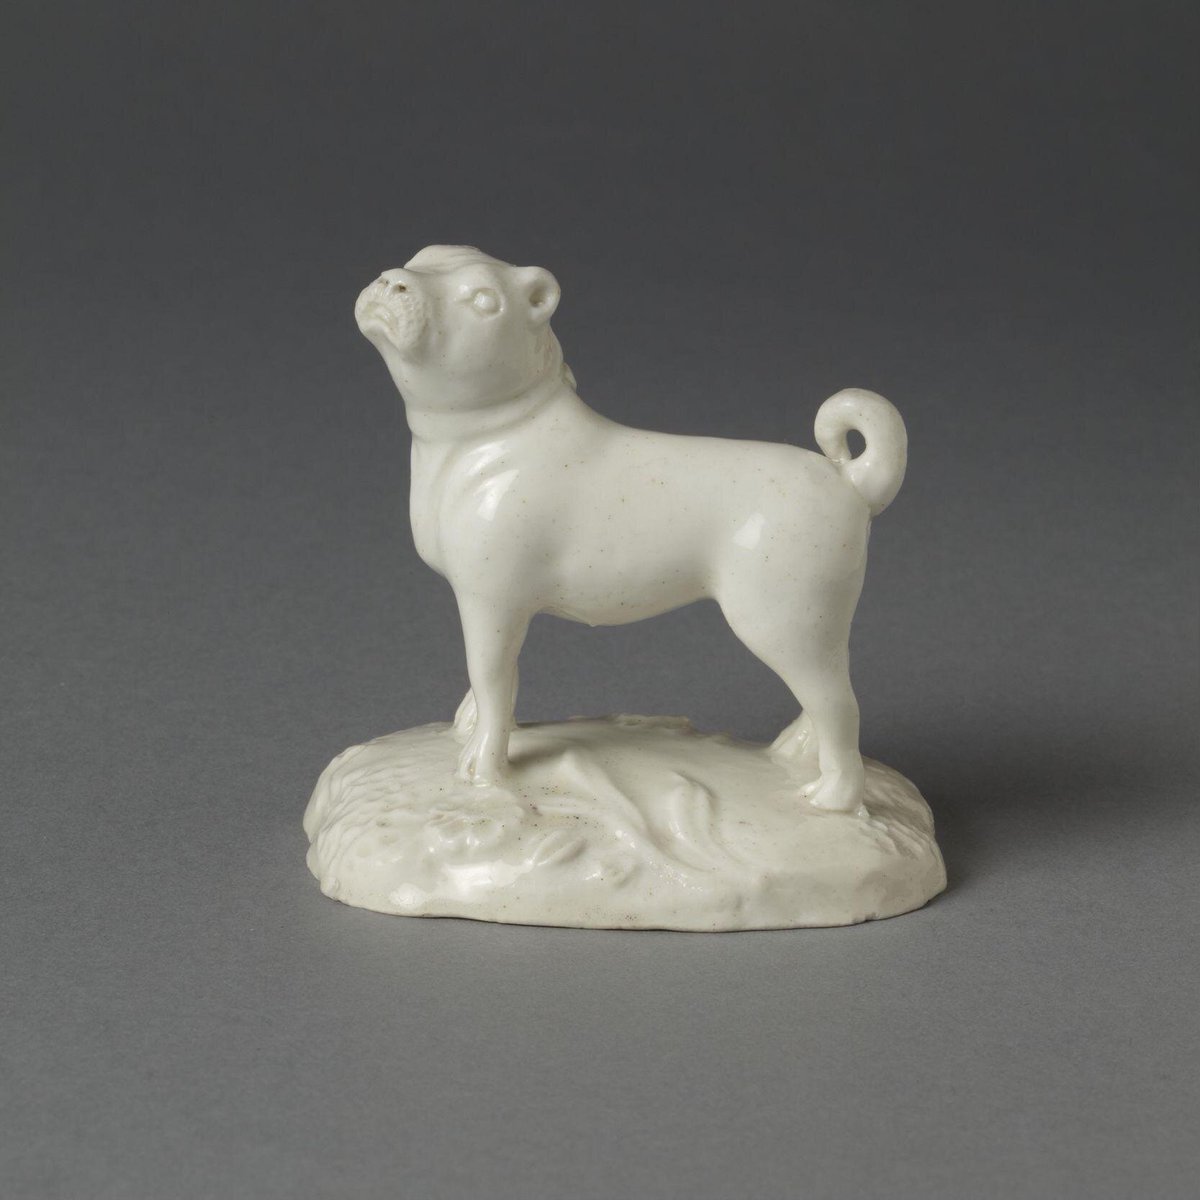 My @ECFjournal article, ‘Little Puggies: Consuming Cuteness and Deforming Motherhood in Susan Ferrier’s Marriage’, is now accessible online! What does a scene involving a pair of porcelain pugs tell us about cuteness and the morality of dog ownership? muse.jhu.edu/article/852620